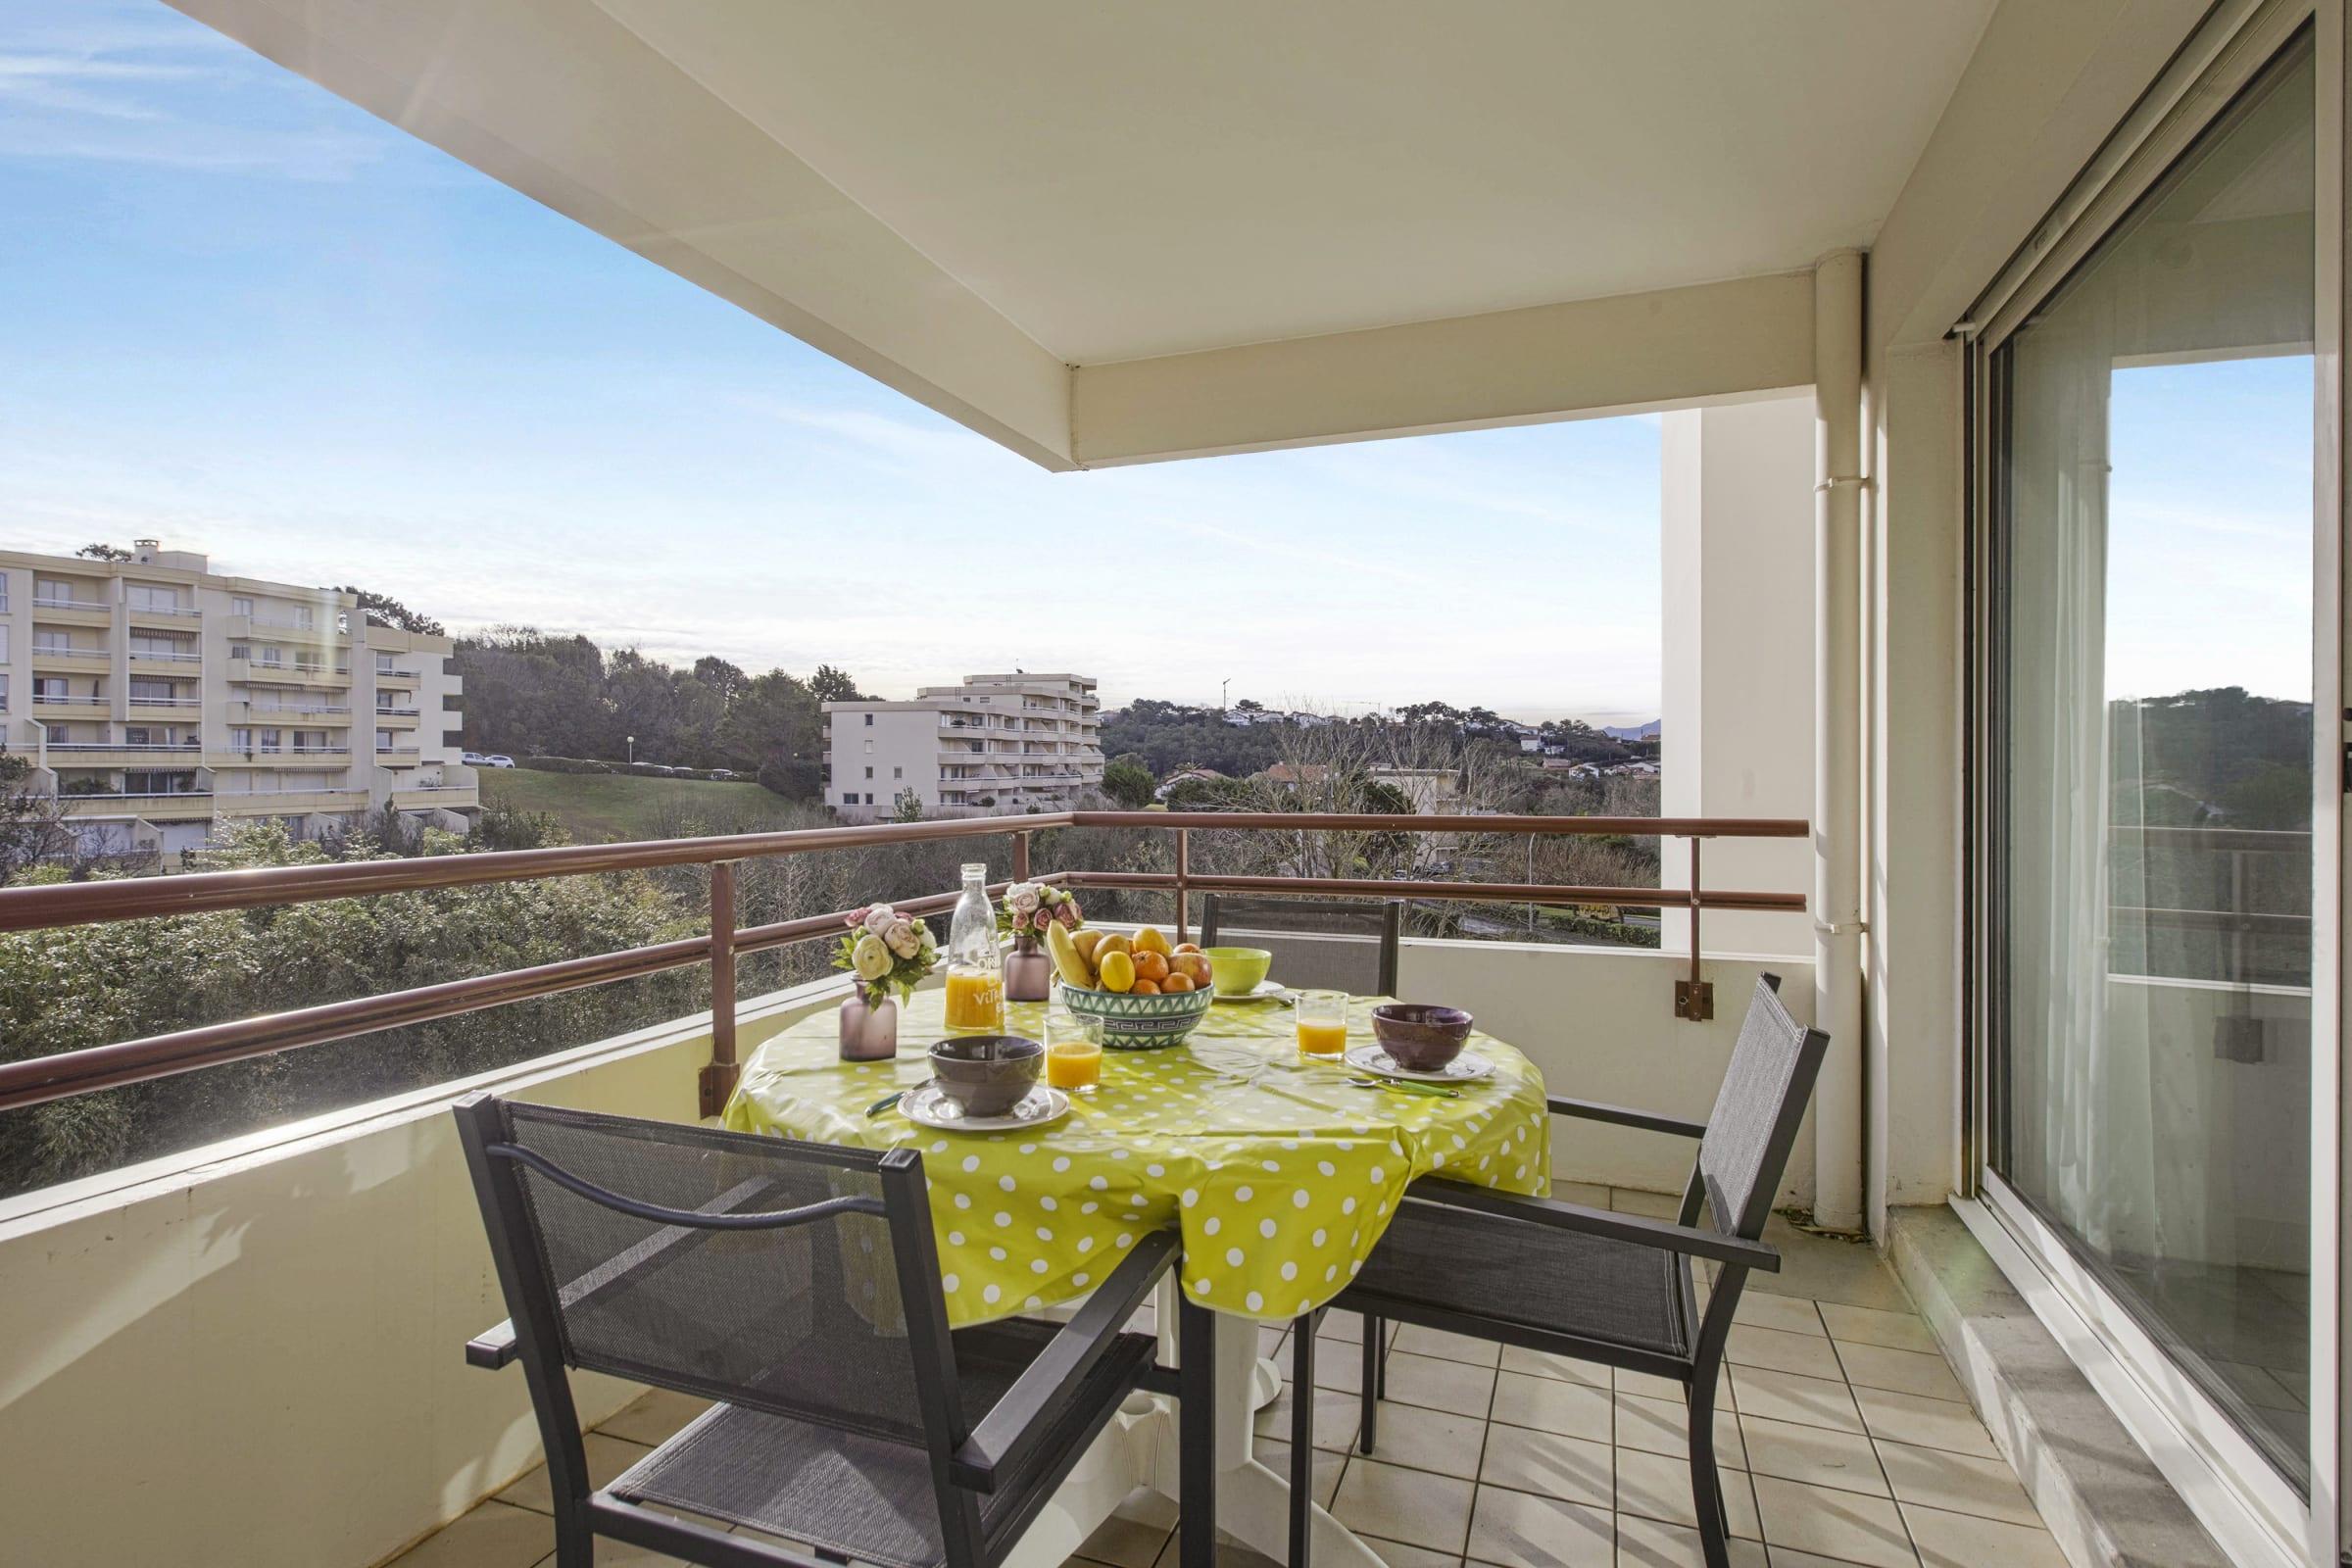 Property Image 1 - Charming one bedroom with balcony in Biarritz